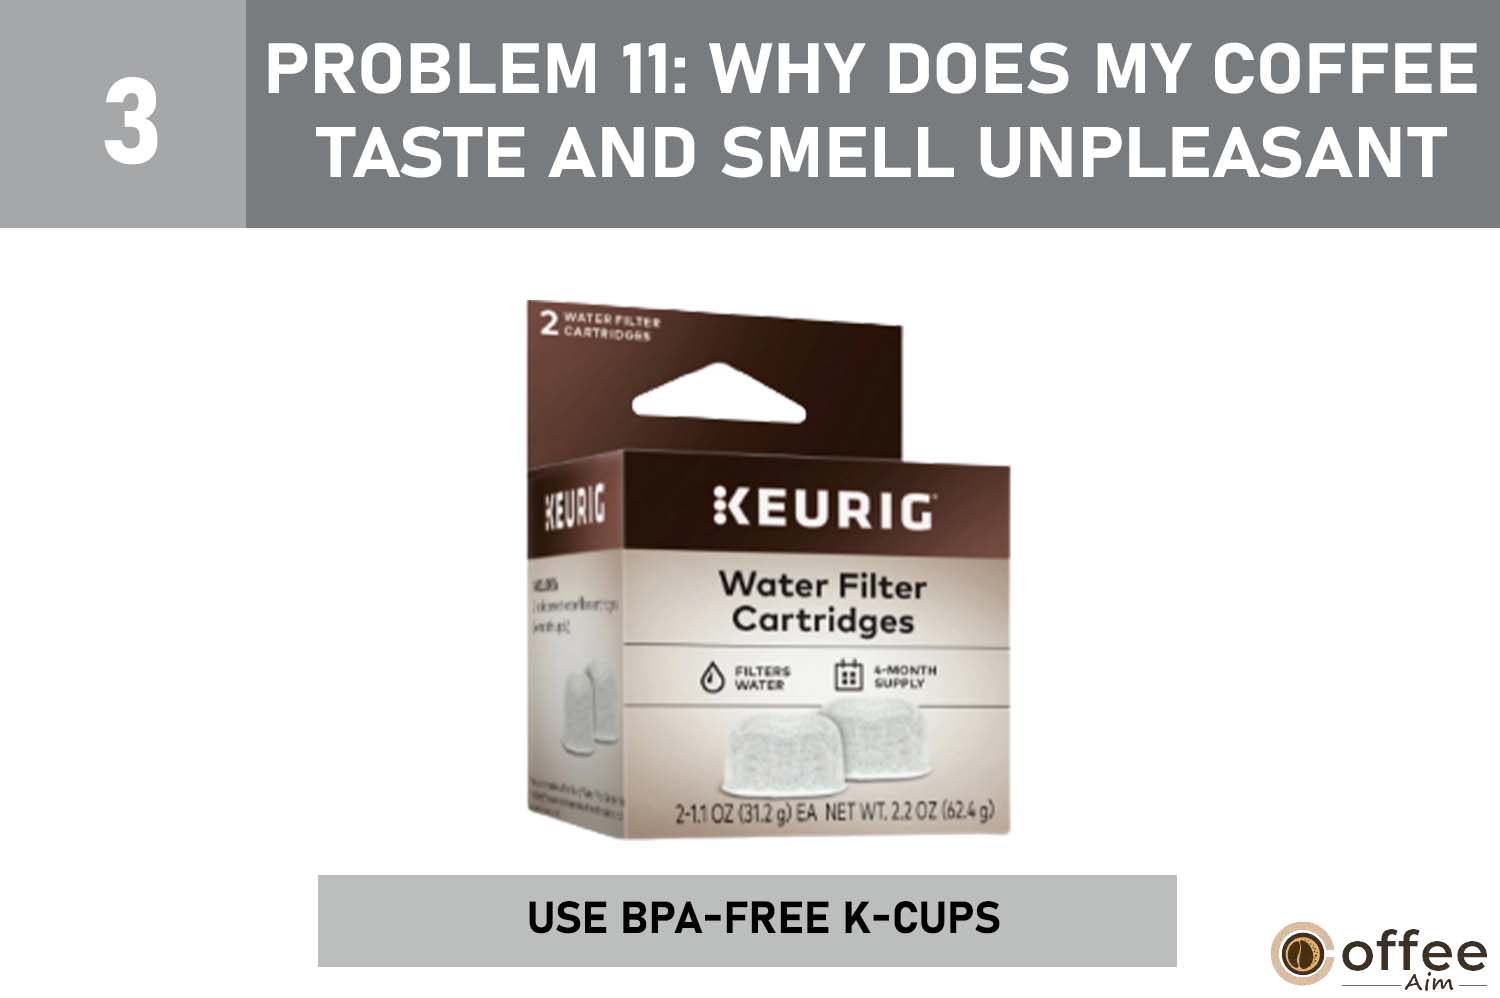 This image highlights the importance of using BPA-free K-Cups as part of addressing Problem 11: "Why Does My Coffee Taste and Smell Unpleasant?" in our article on Keurig K-Mini Plus Problems.